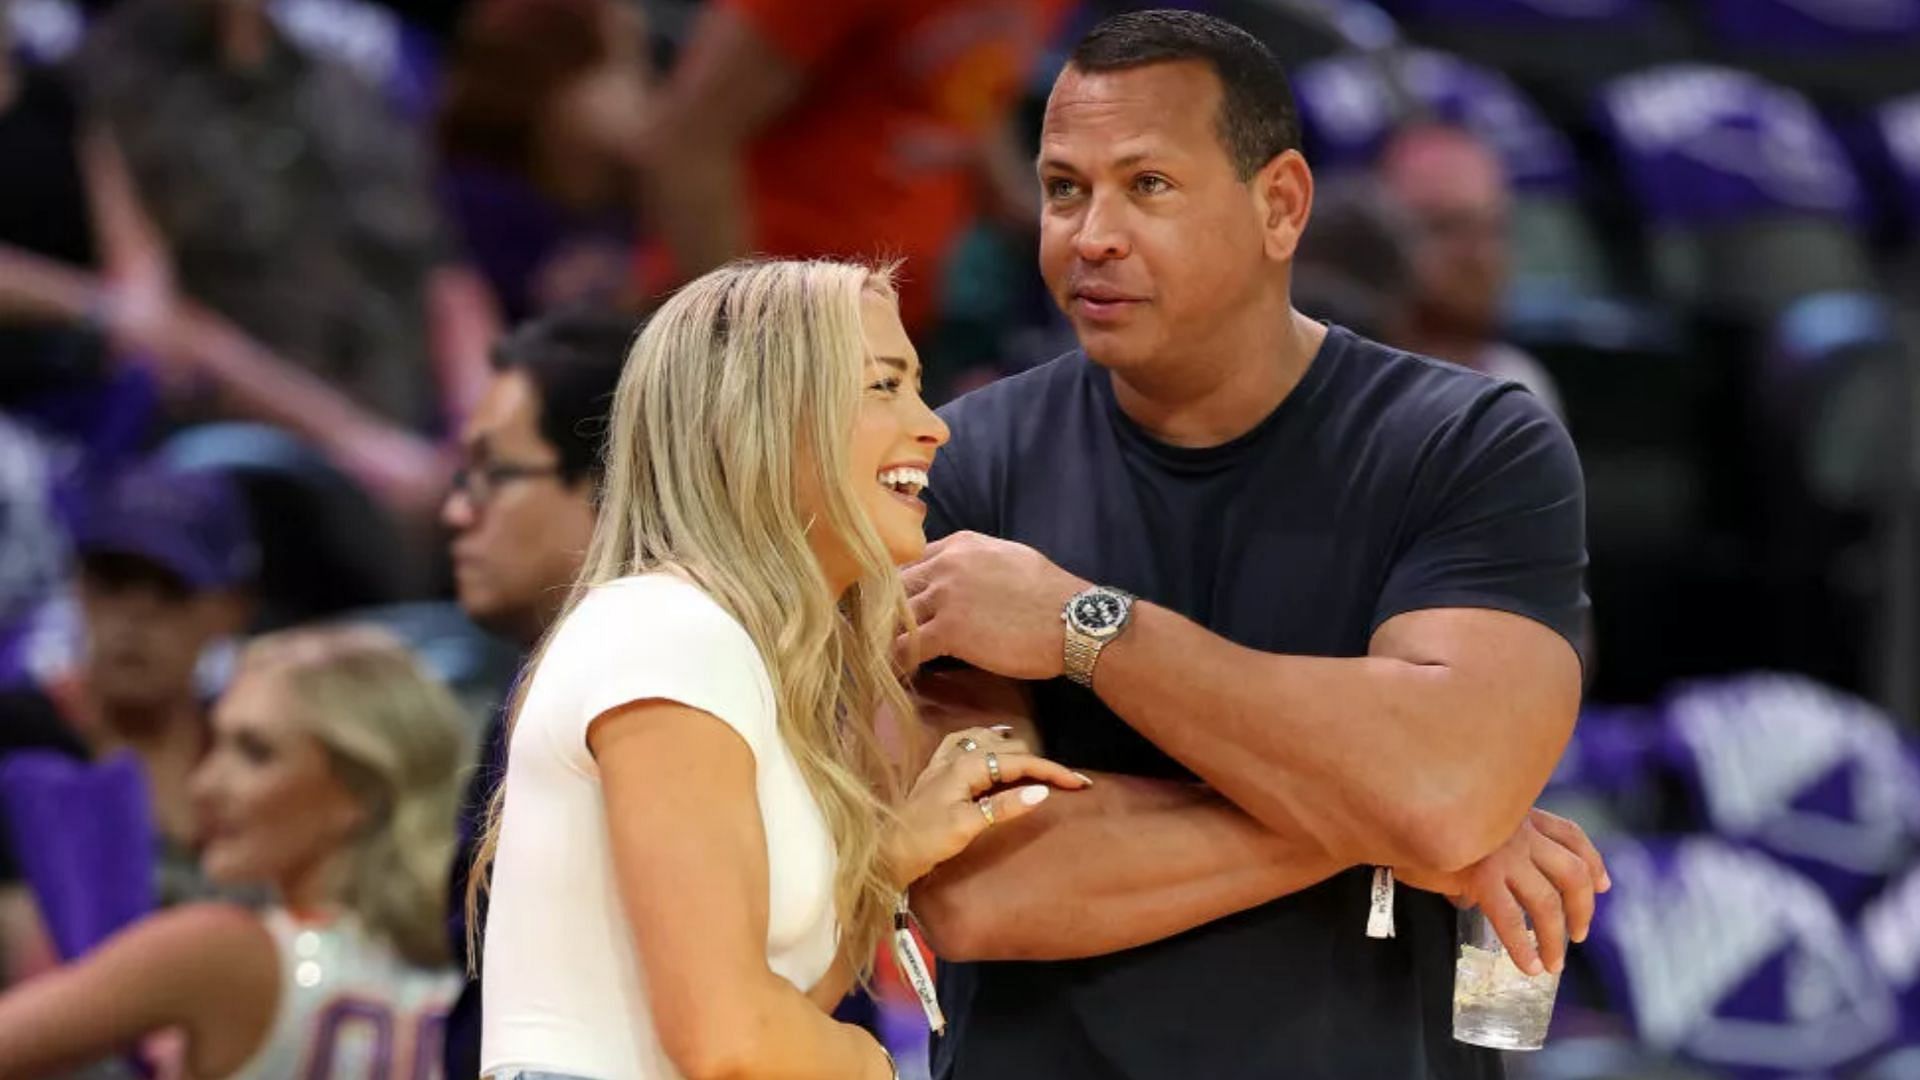 Alex Rodriguez with Kathryne Padgett at a Basketball game.